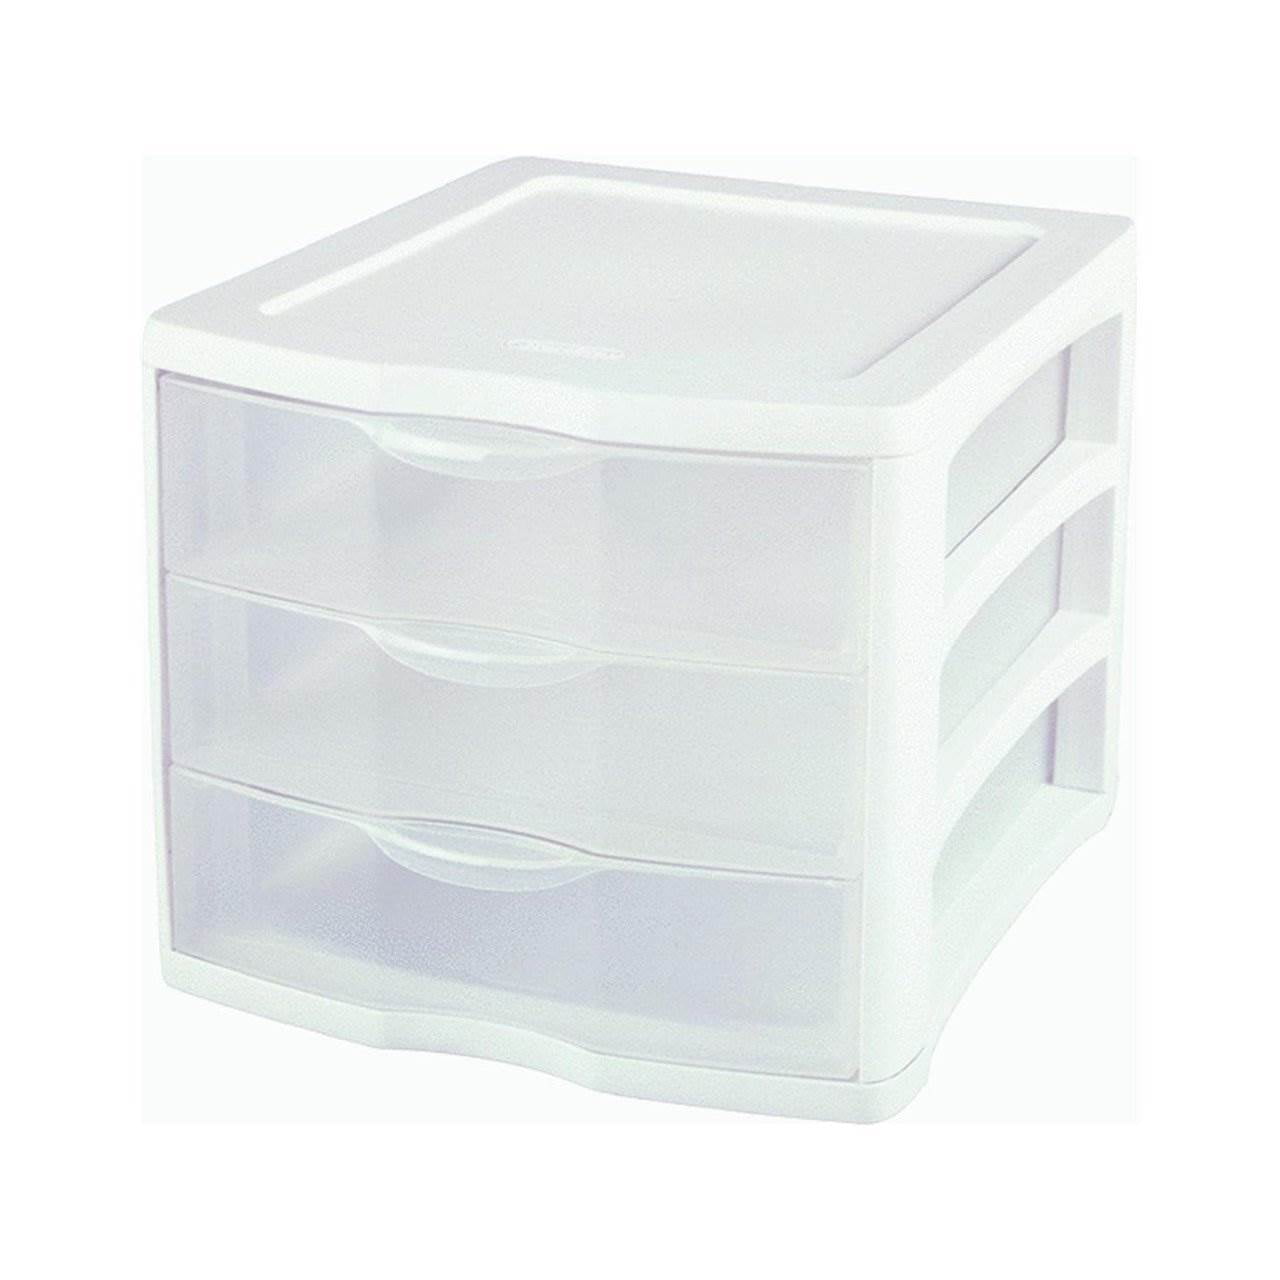 Medium Stackable Organizer Tray Translucent, 6-3/8 x 9-1/2 x 2-3/4 H | The Container Store